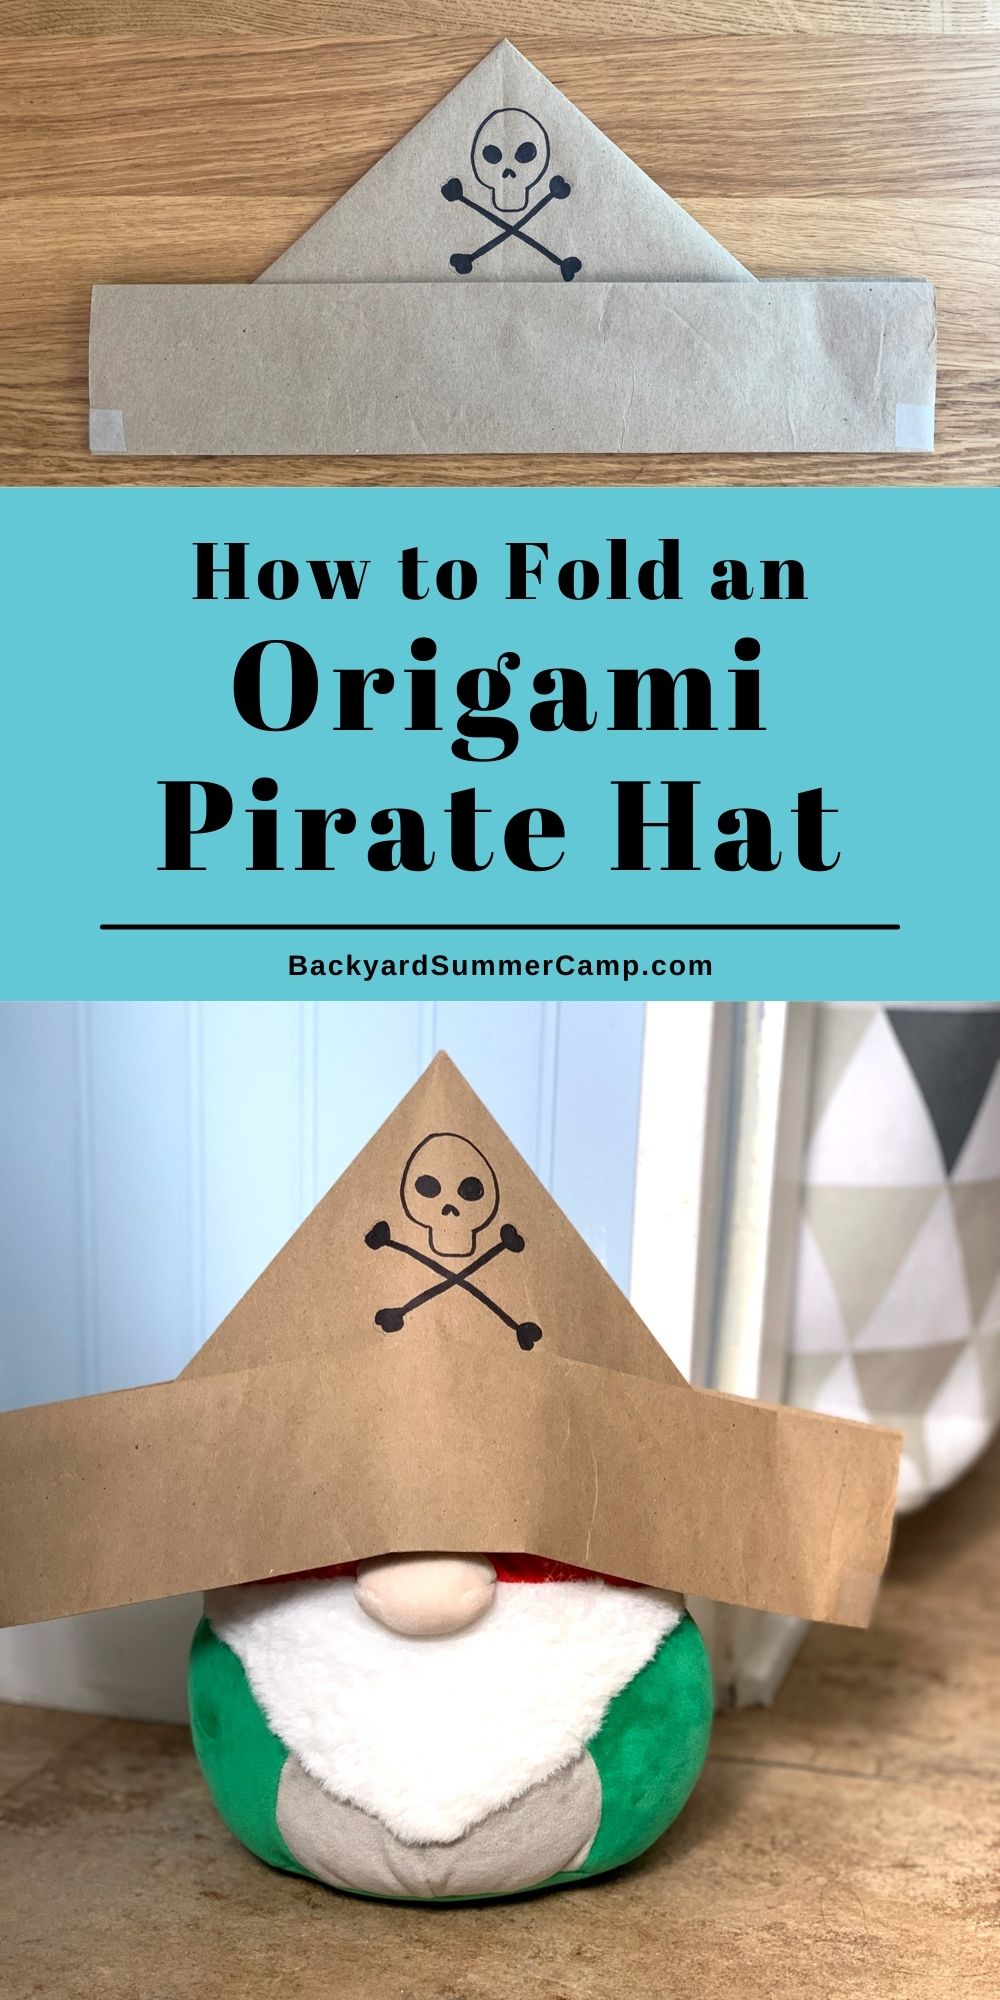 How to fold an origami pirate hat from brown packing paper.